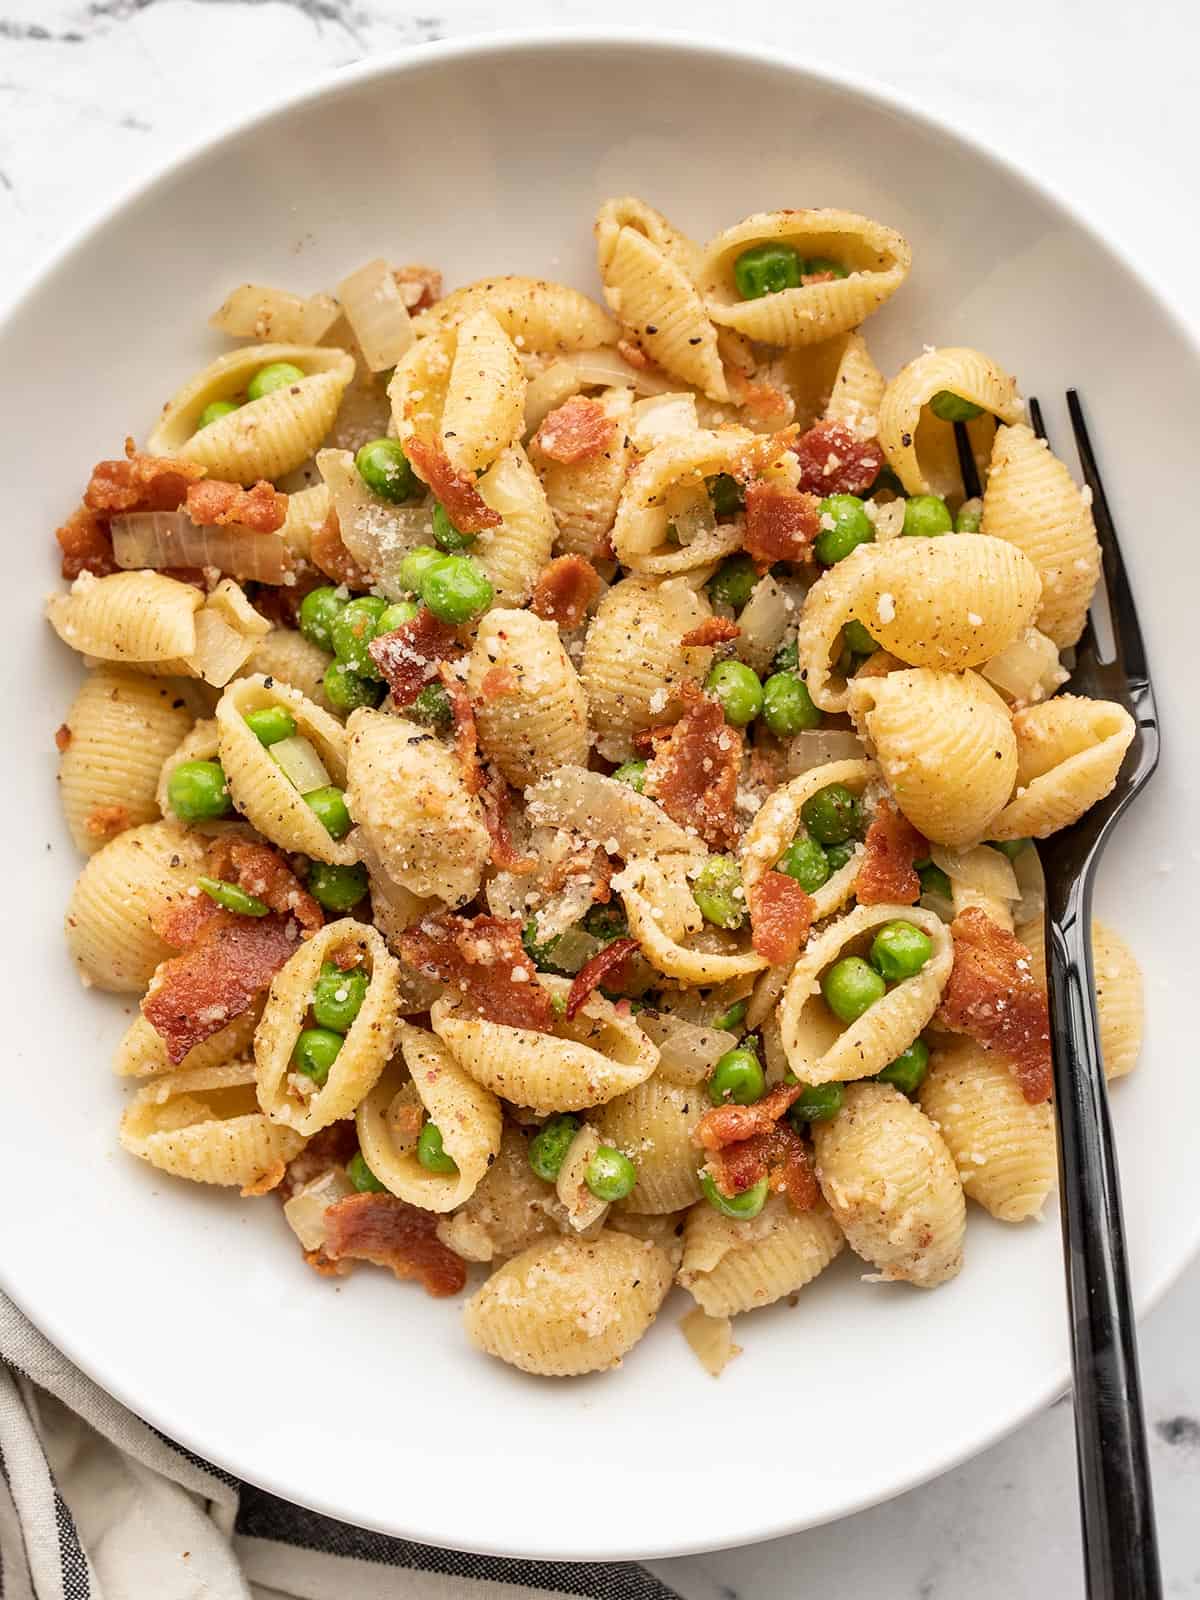 Overhead view of a bowl of pasta with bacon and peas